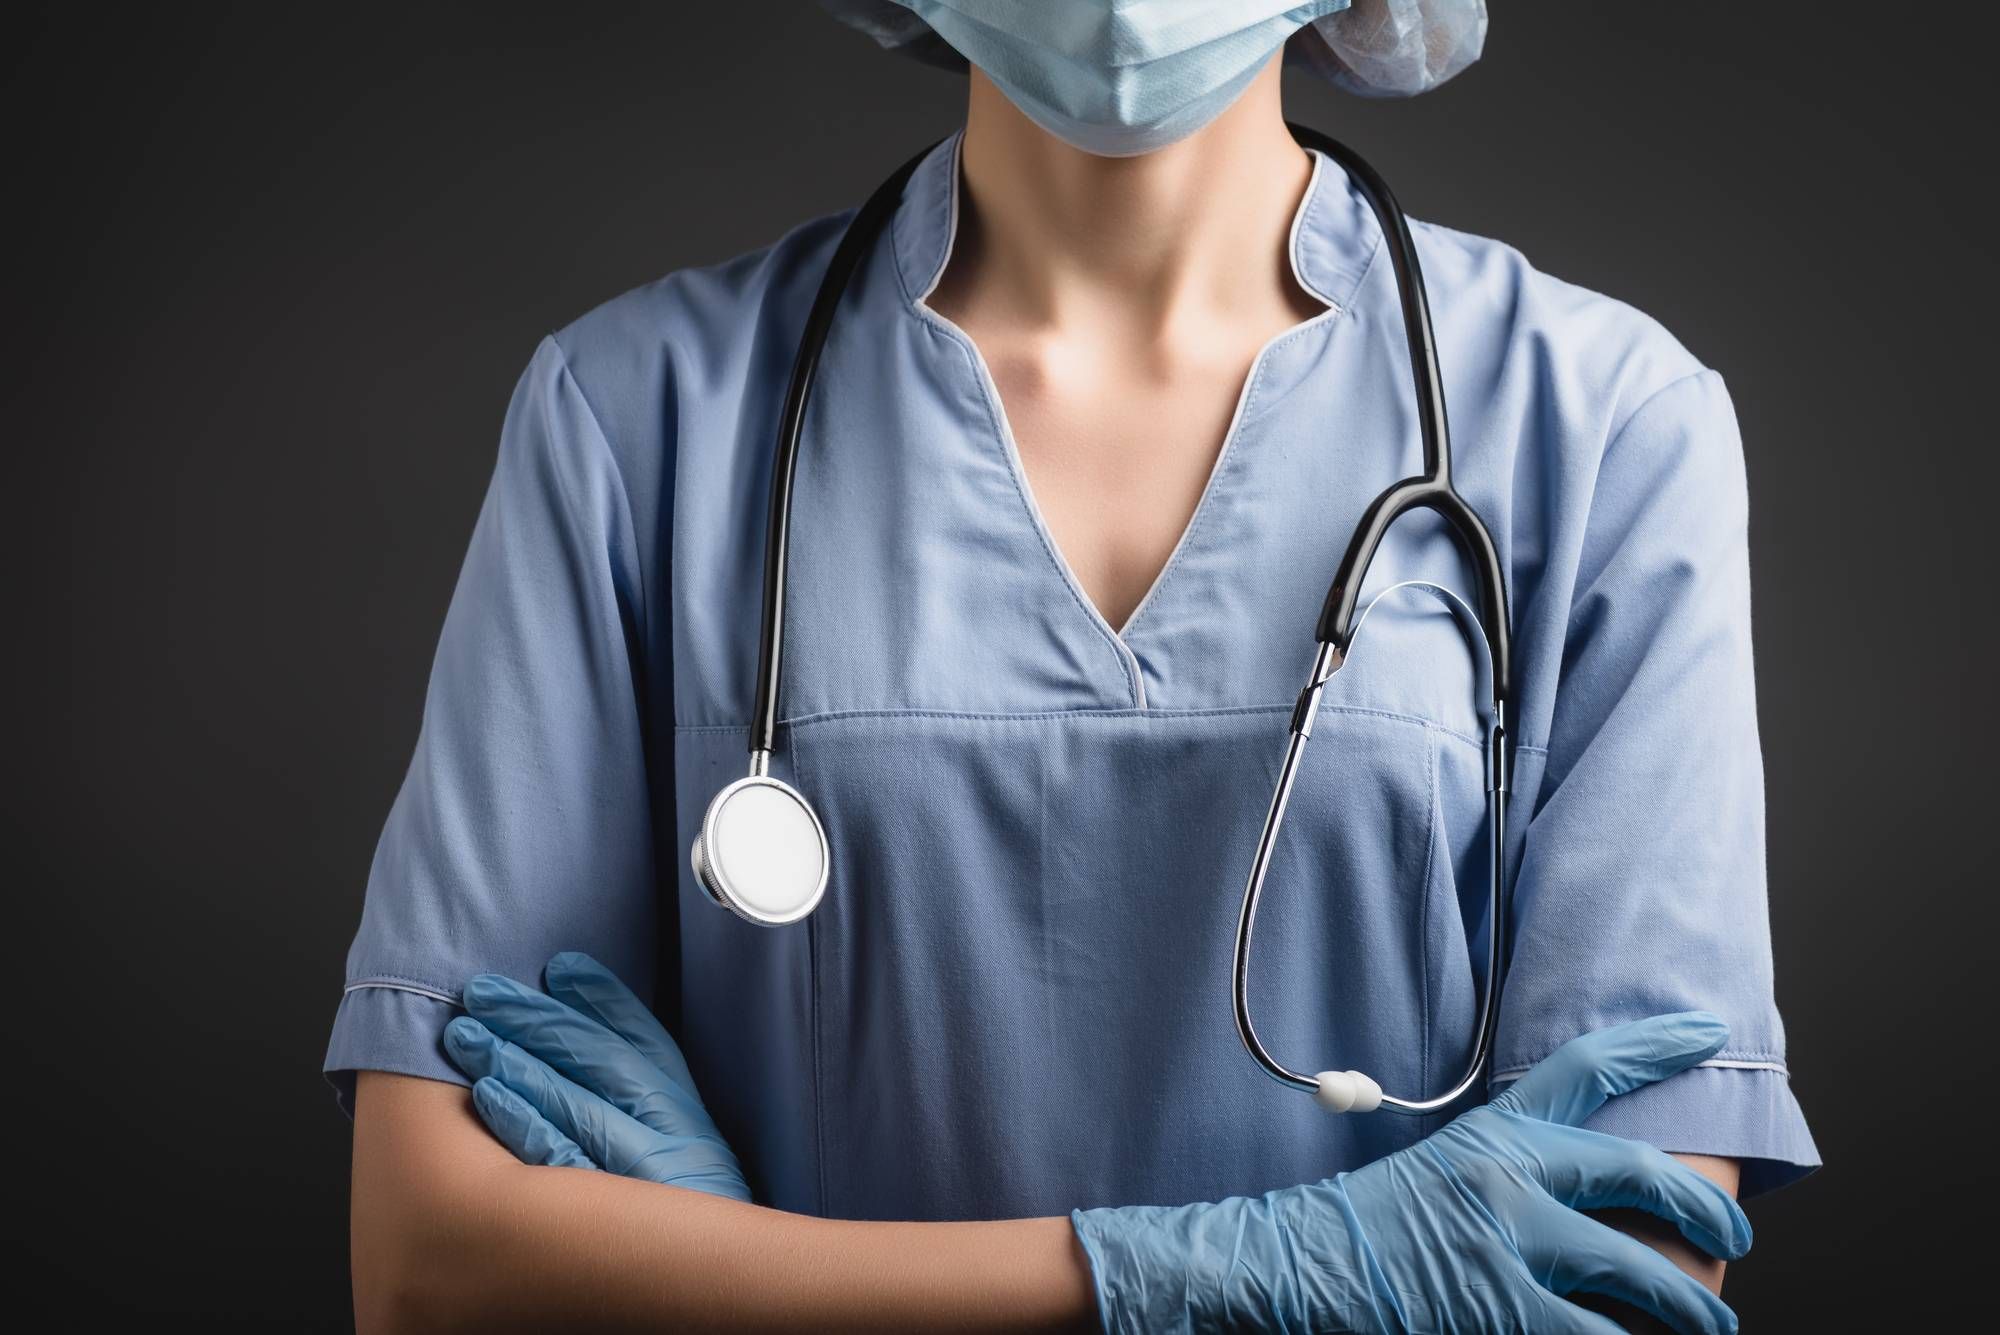 SnapNurse is facing a class action alleging it is not paying its healthcare workers properly.